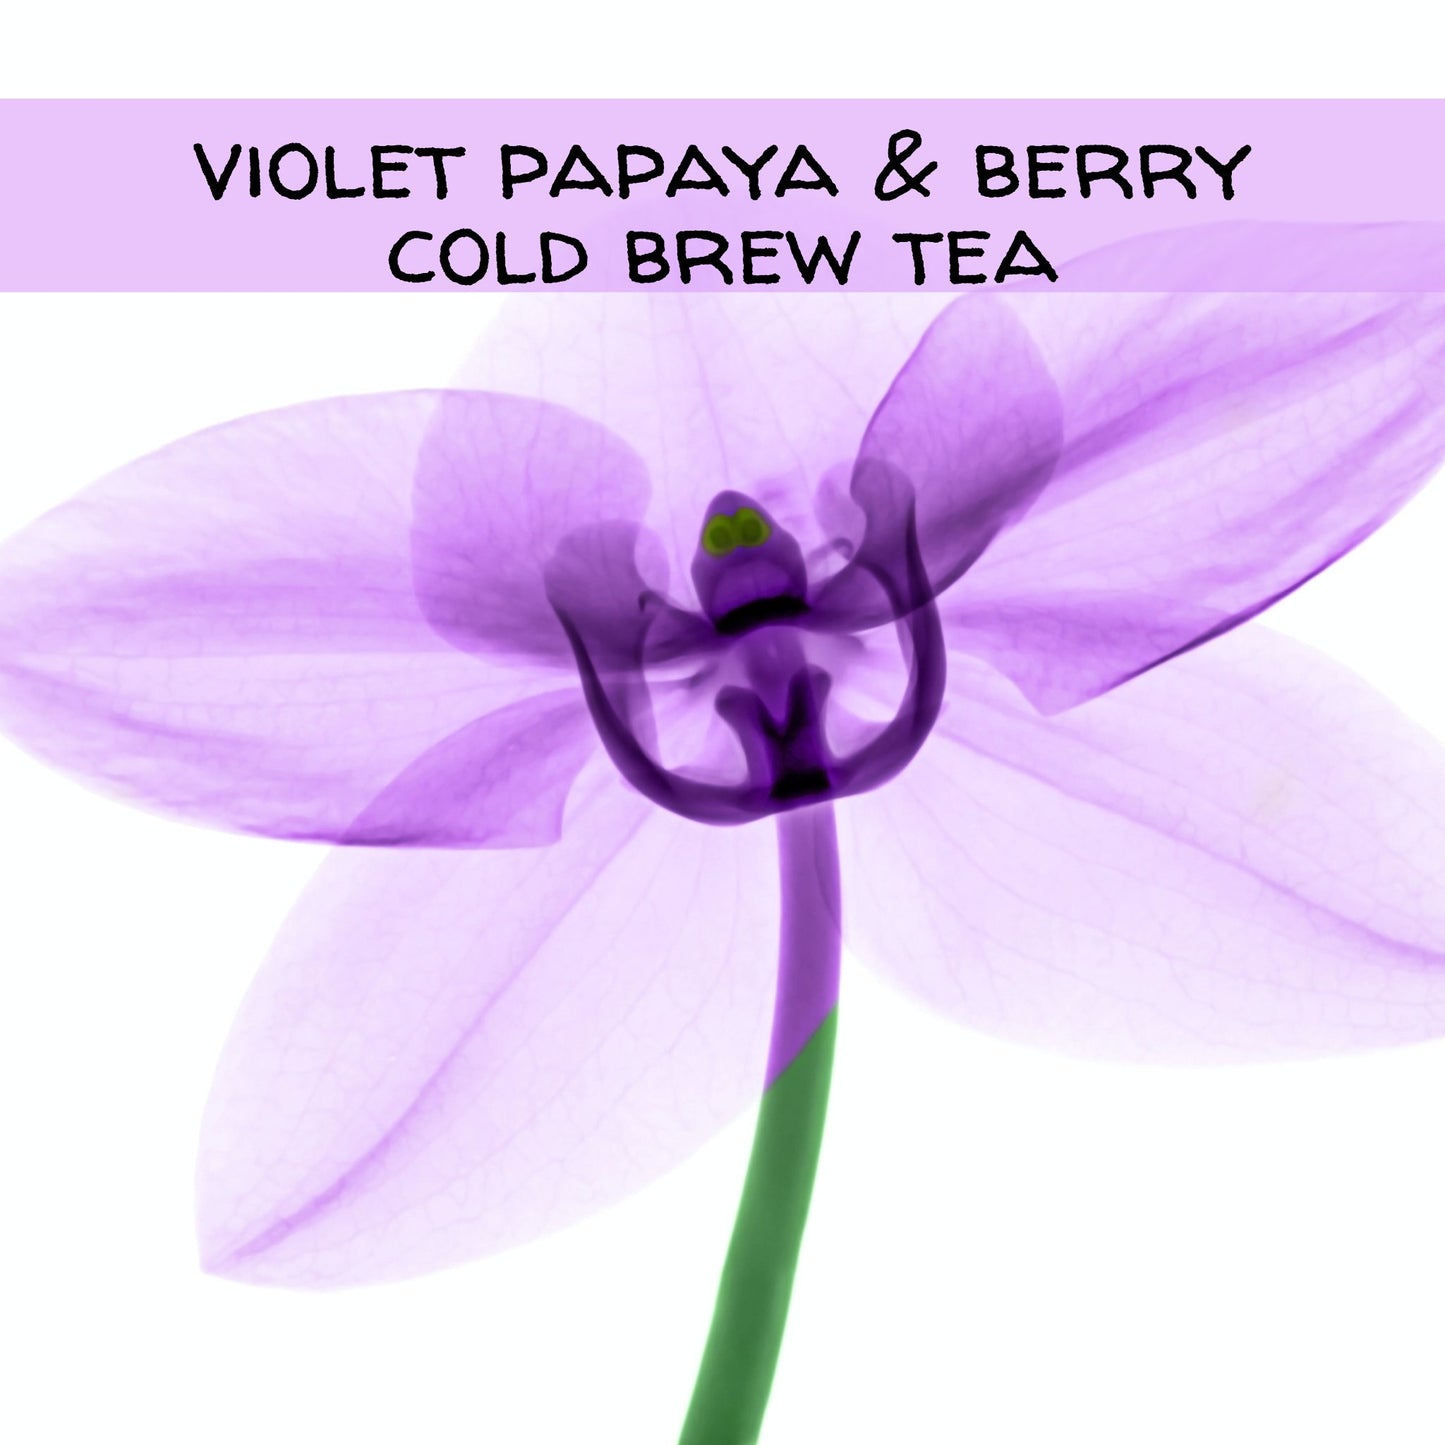 Violet Papaya & Berry Herbal Iced Tea Bags, available in quantities of 1, 6 or 12 quart size pouches Iced Tea The Grateful Tea Co. 12 